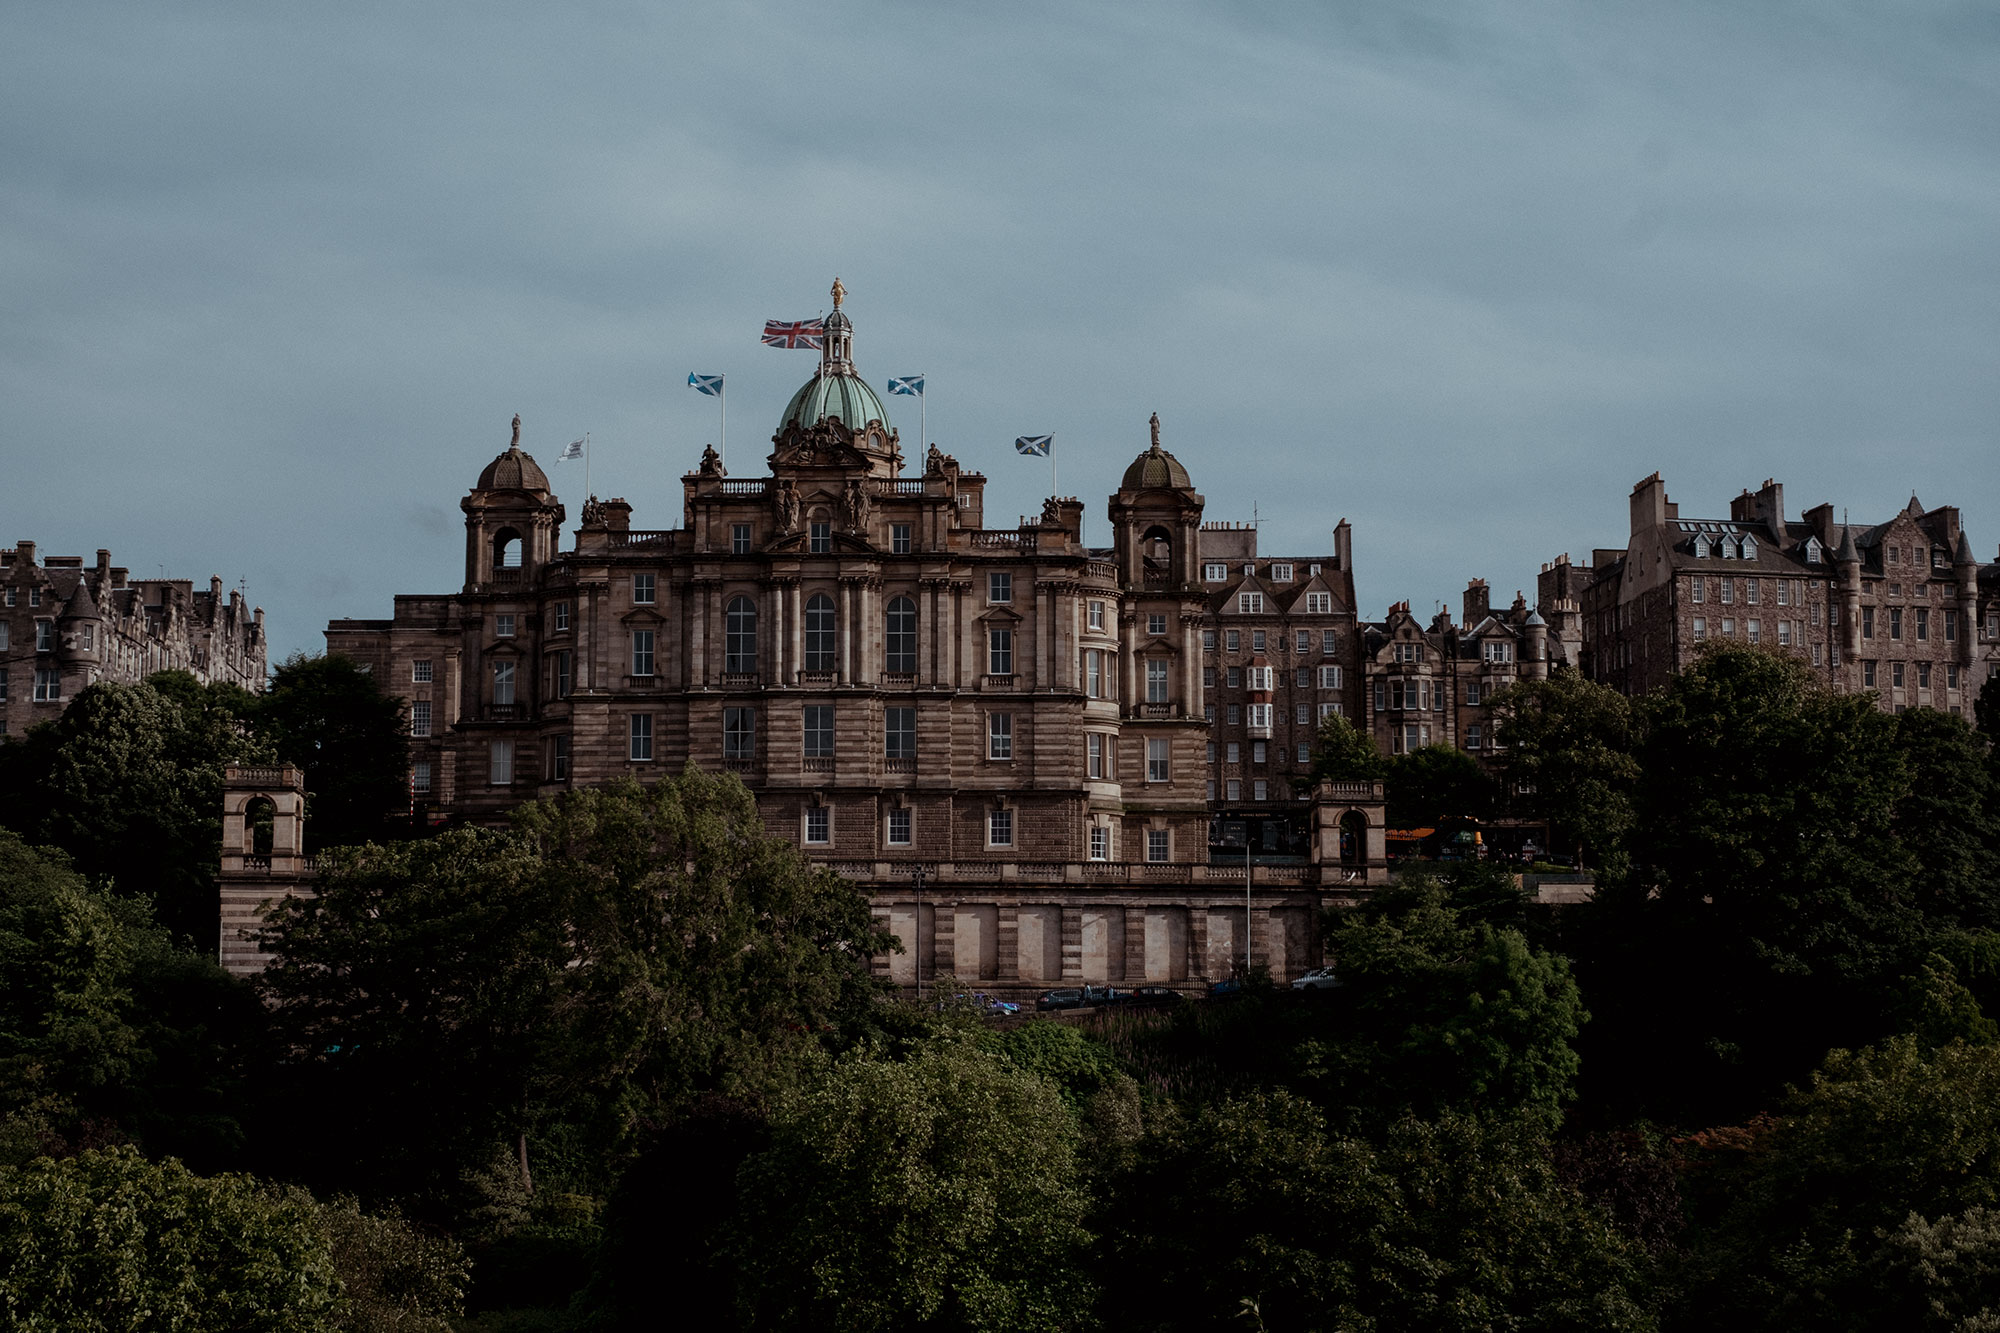 A Quick Travel & Food Guide To Edinburgh, Scotland / iHeartAlice.com - Berlin based Travel, Lifestyle & Foodblog by Alice M. Huynh